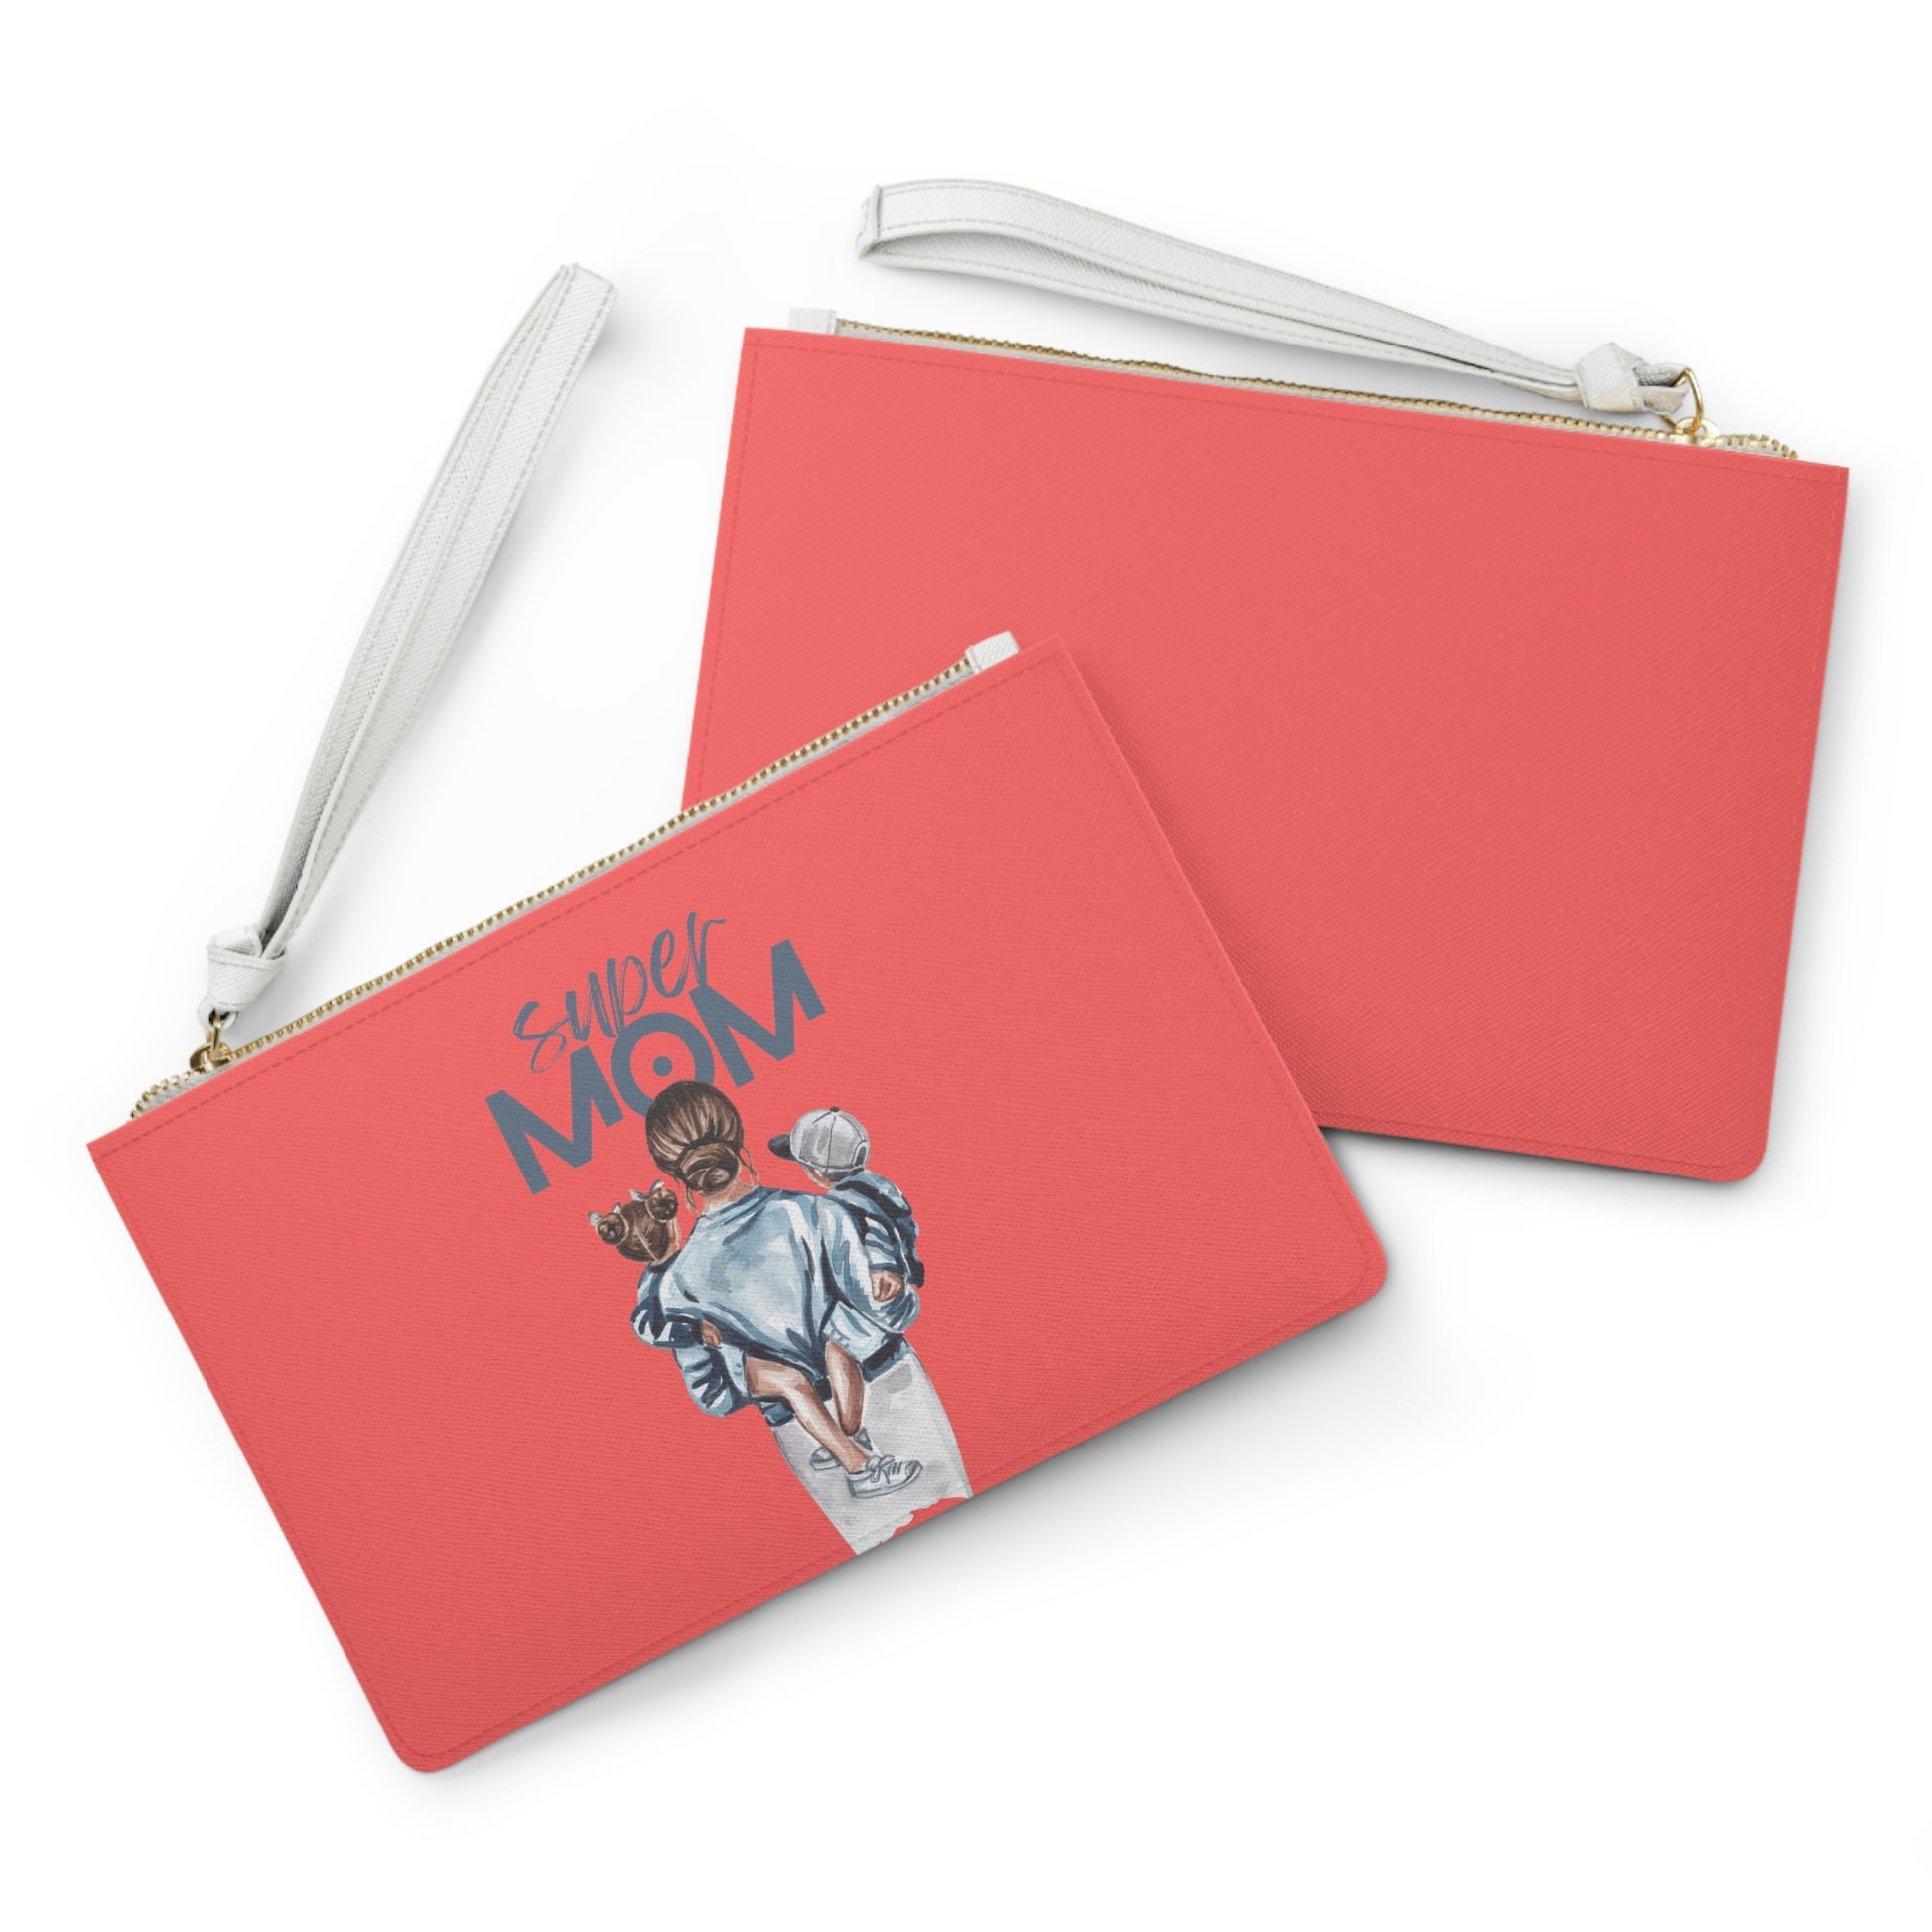 Super Mom Clutch Bag | BKLA | Shoes & Accessories | shoes, hats, phone covers, tote bags, clutch bags